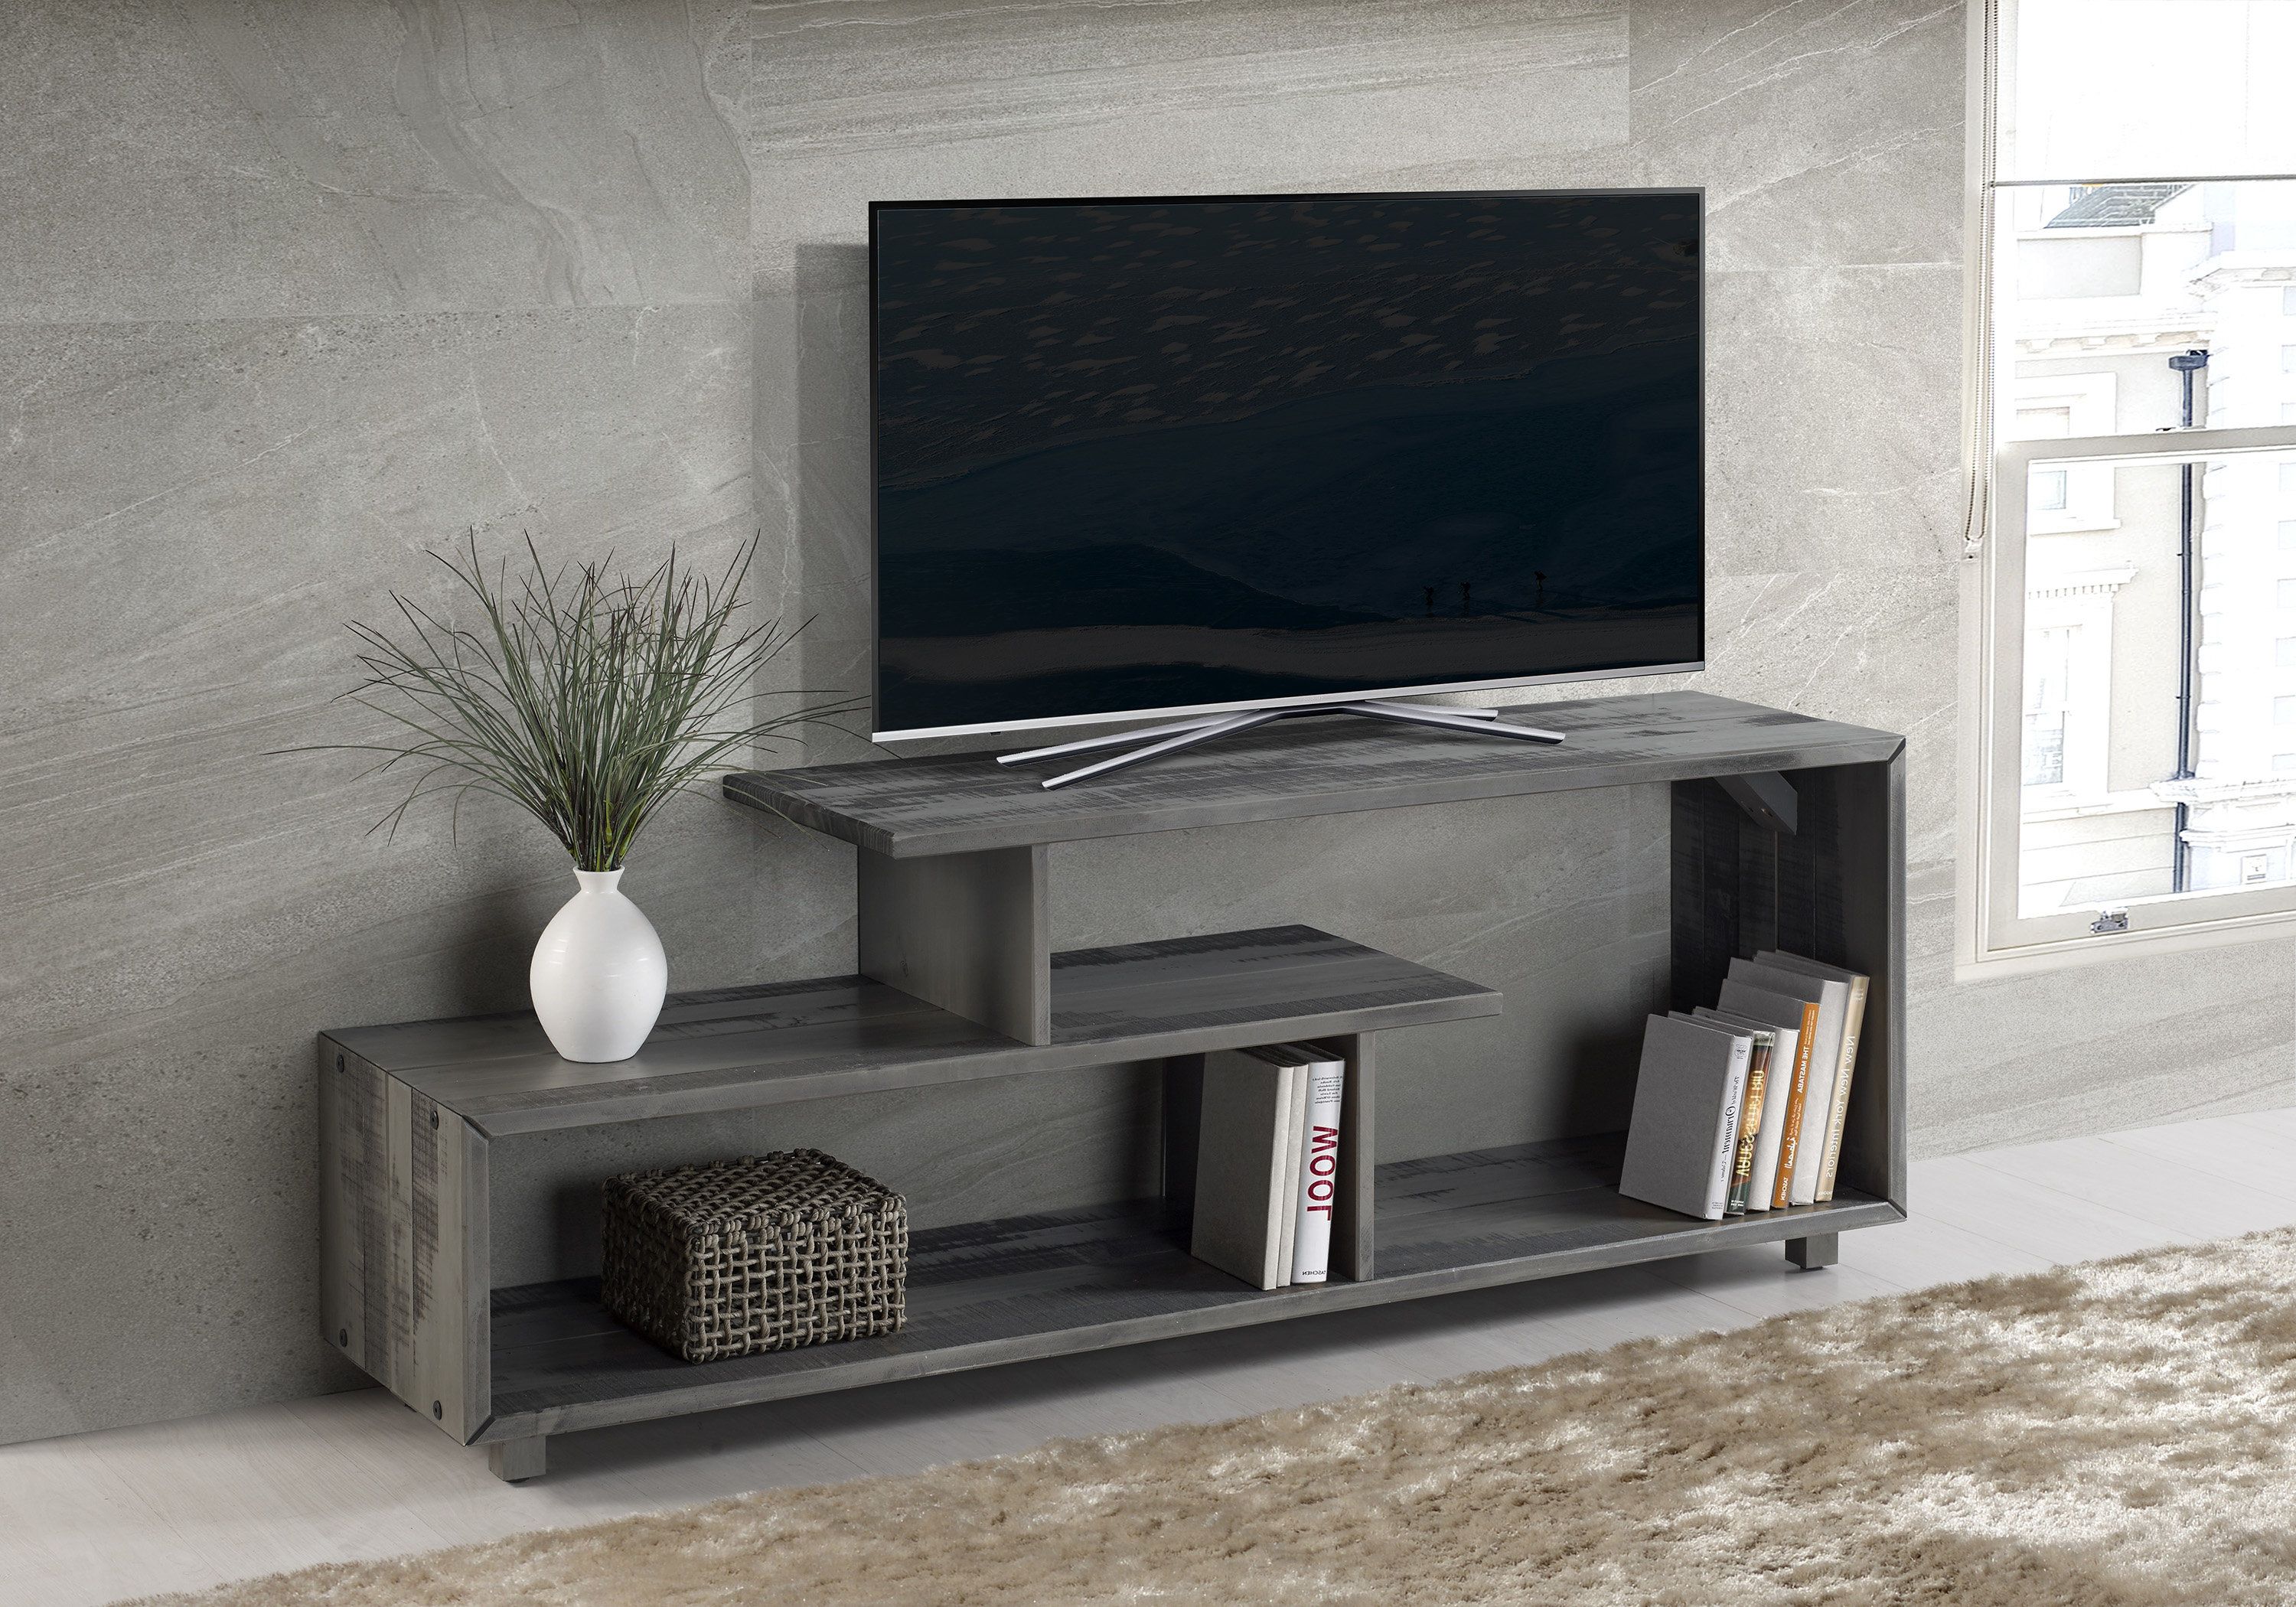 Allmodern Pertaining To Current Single Shelf Tv Stands (View 12 of 20)